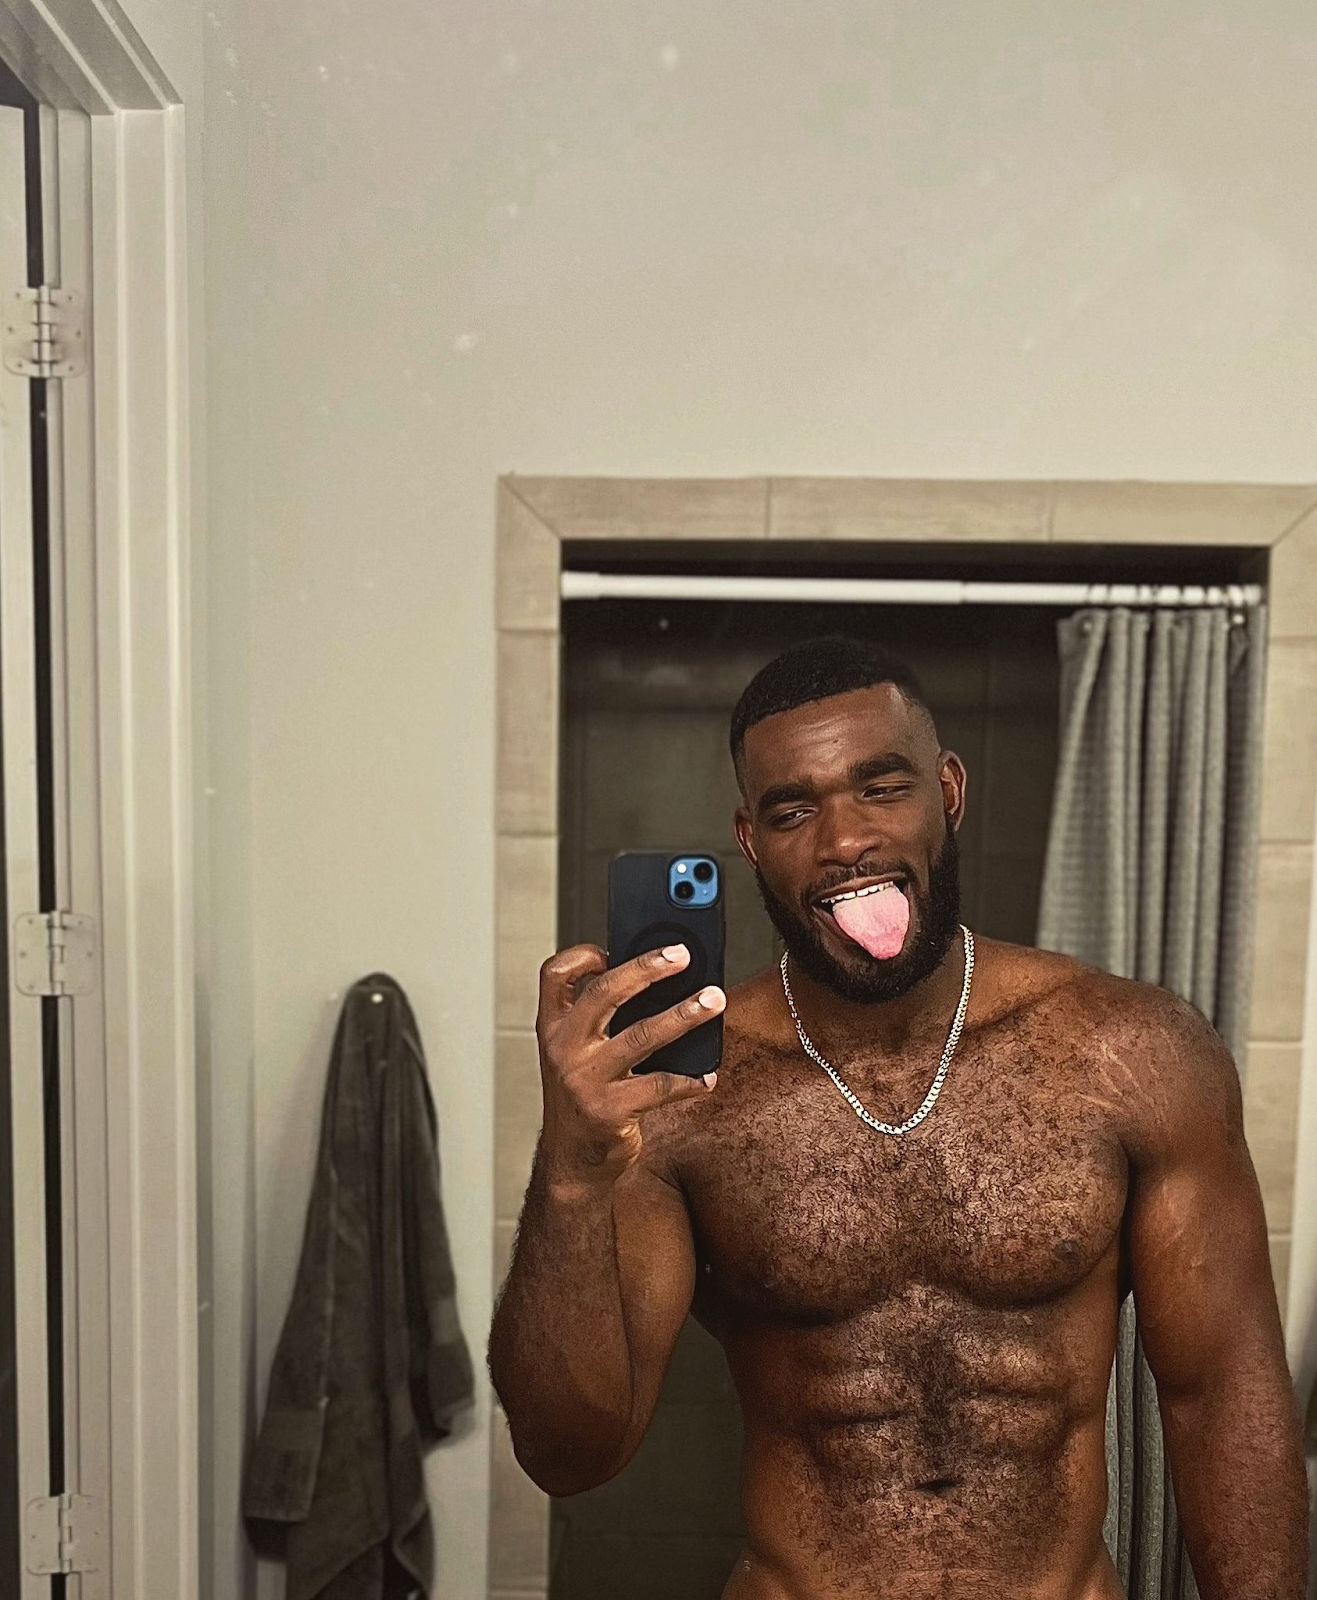 Marshall Price sticking his tongue out while taking a gay shirtless mirror selfie for his Onlyfans subscribers